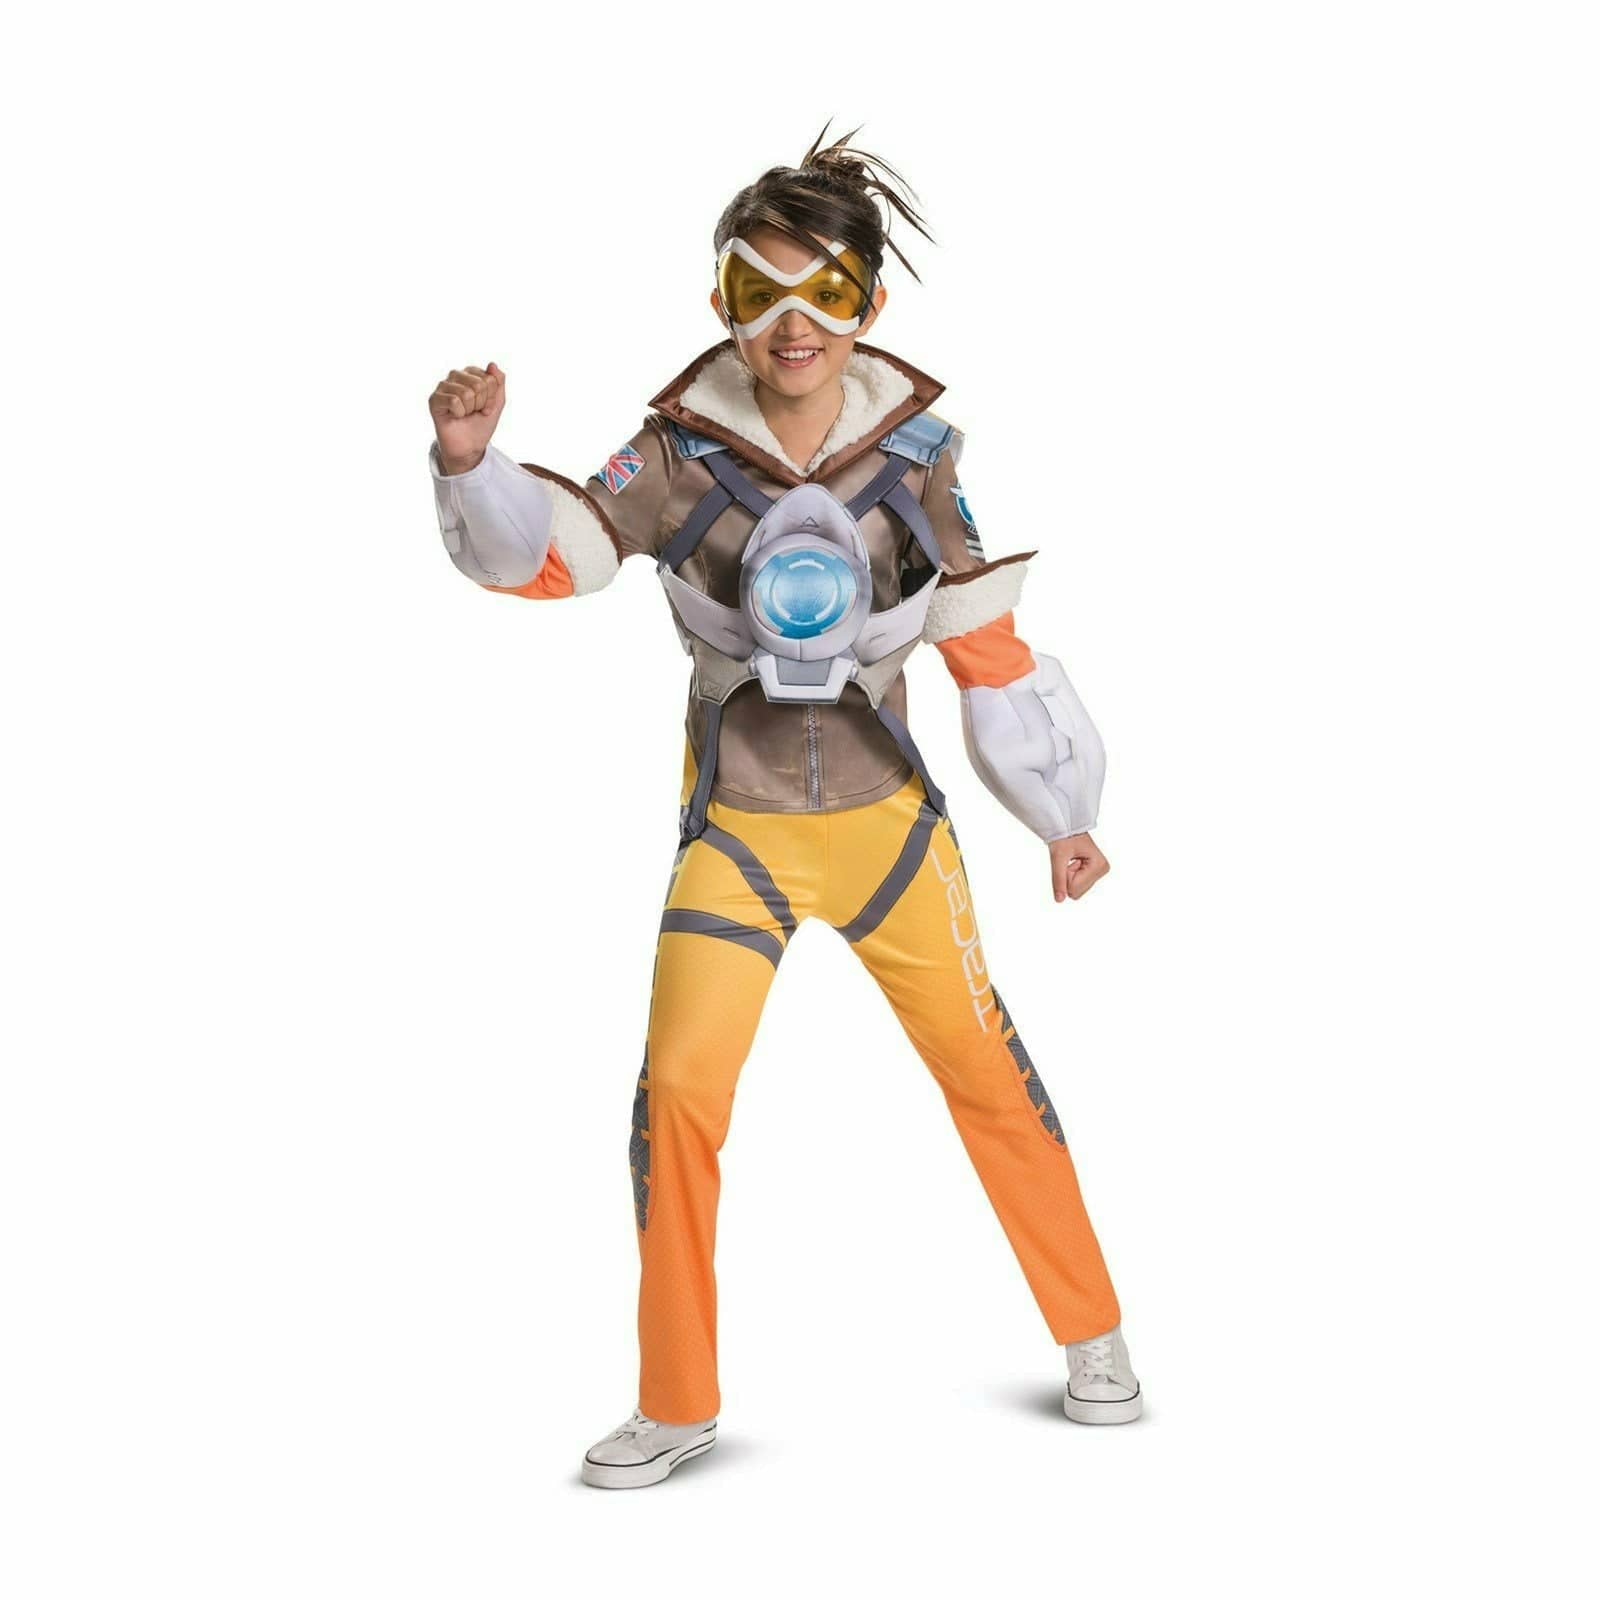 Disguise COSTUMES Large (10-12) Girls Tracer Deluxe Kid's Costume